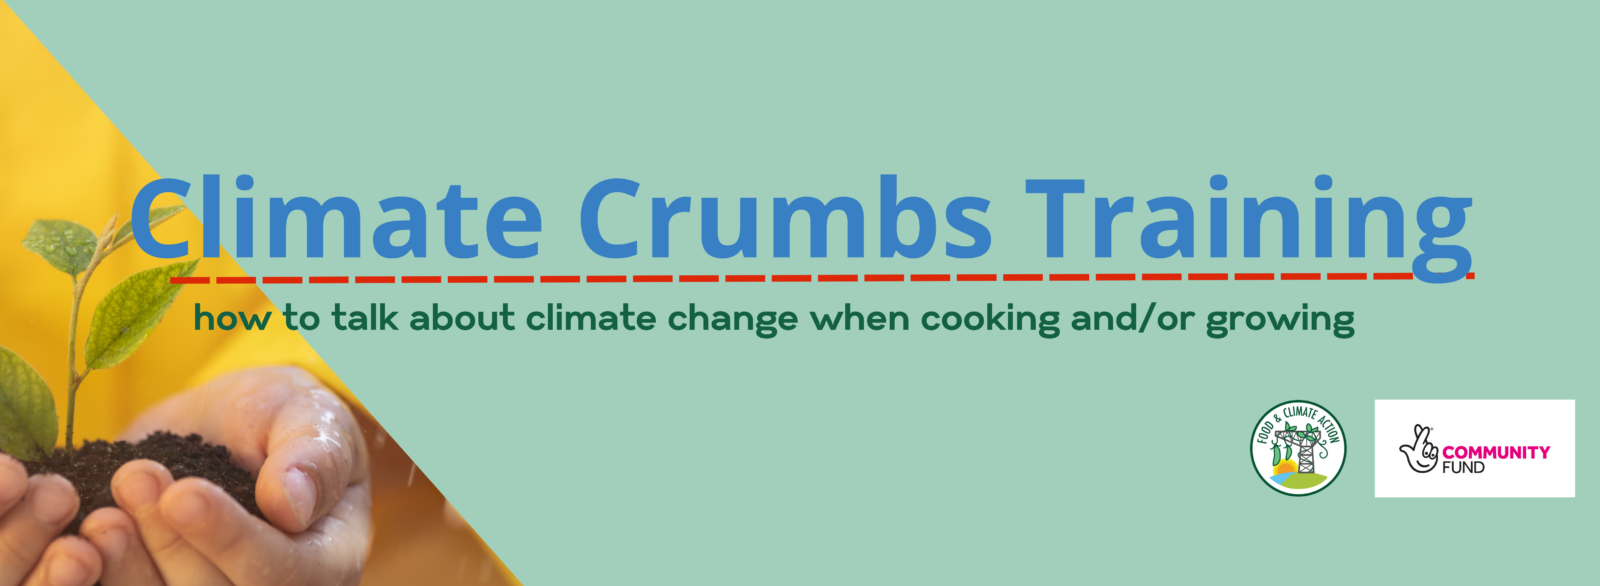 Climate Crumbs Eventbrite Collection 6750 × 2304Px 6700 × 2304Px 6600 × 2304Px 6500 × 2304Px 6300 × 2304Px